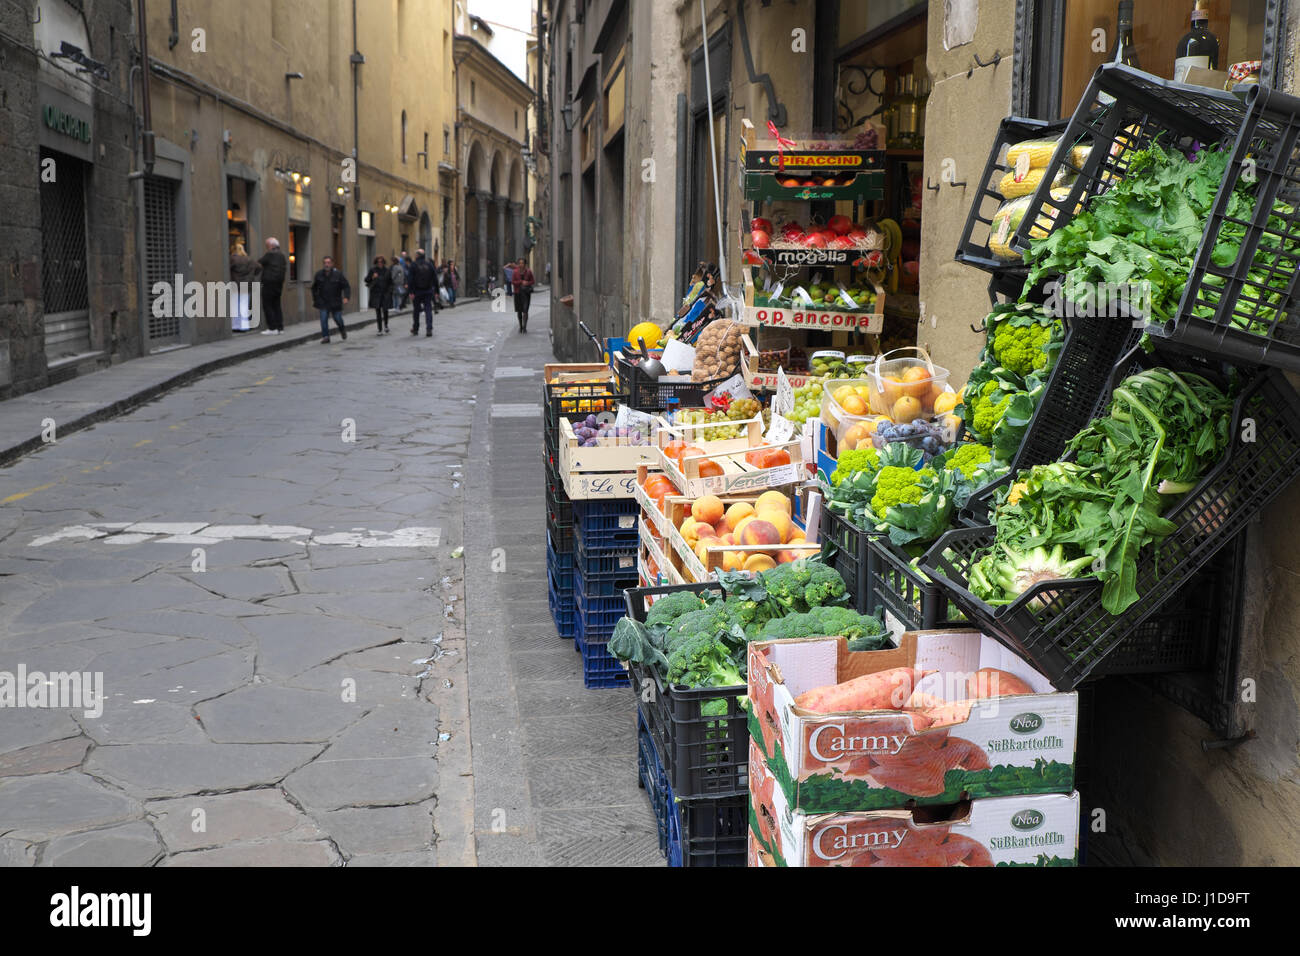 Greengrocer in central Florence, Italy - Fruits and vegetables corner shop, Firenze, Tuscany, Europe Stock Photo